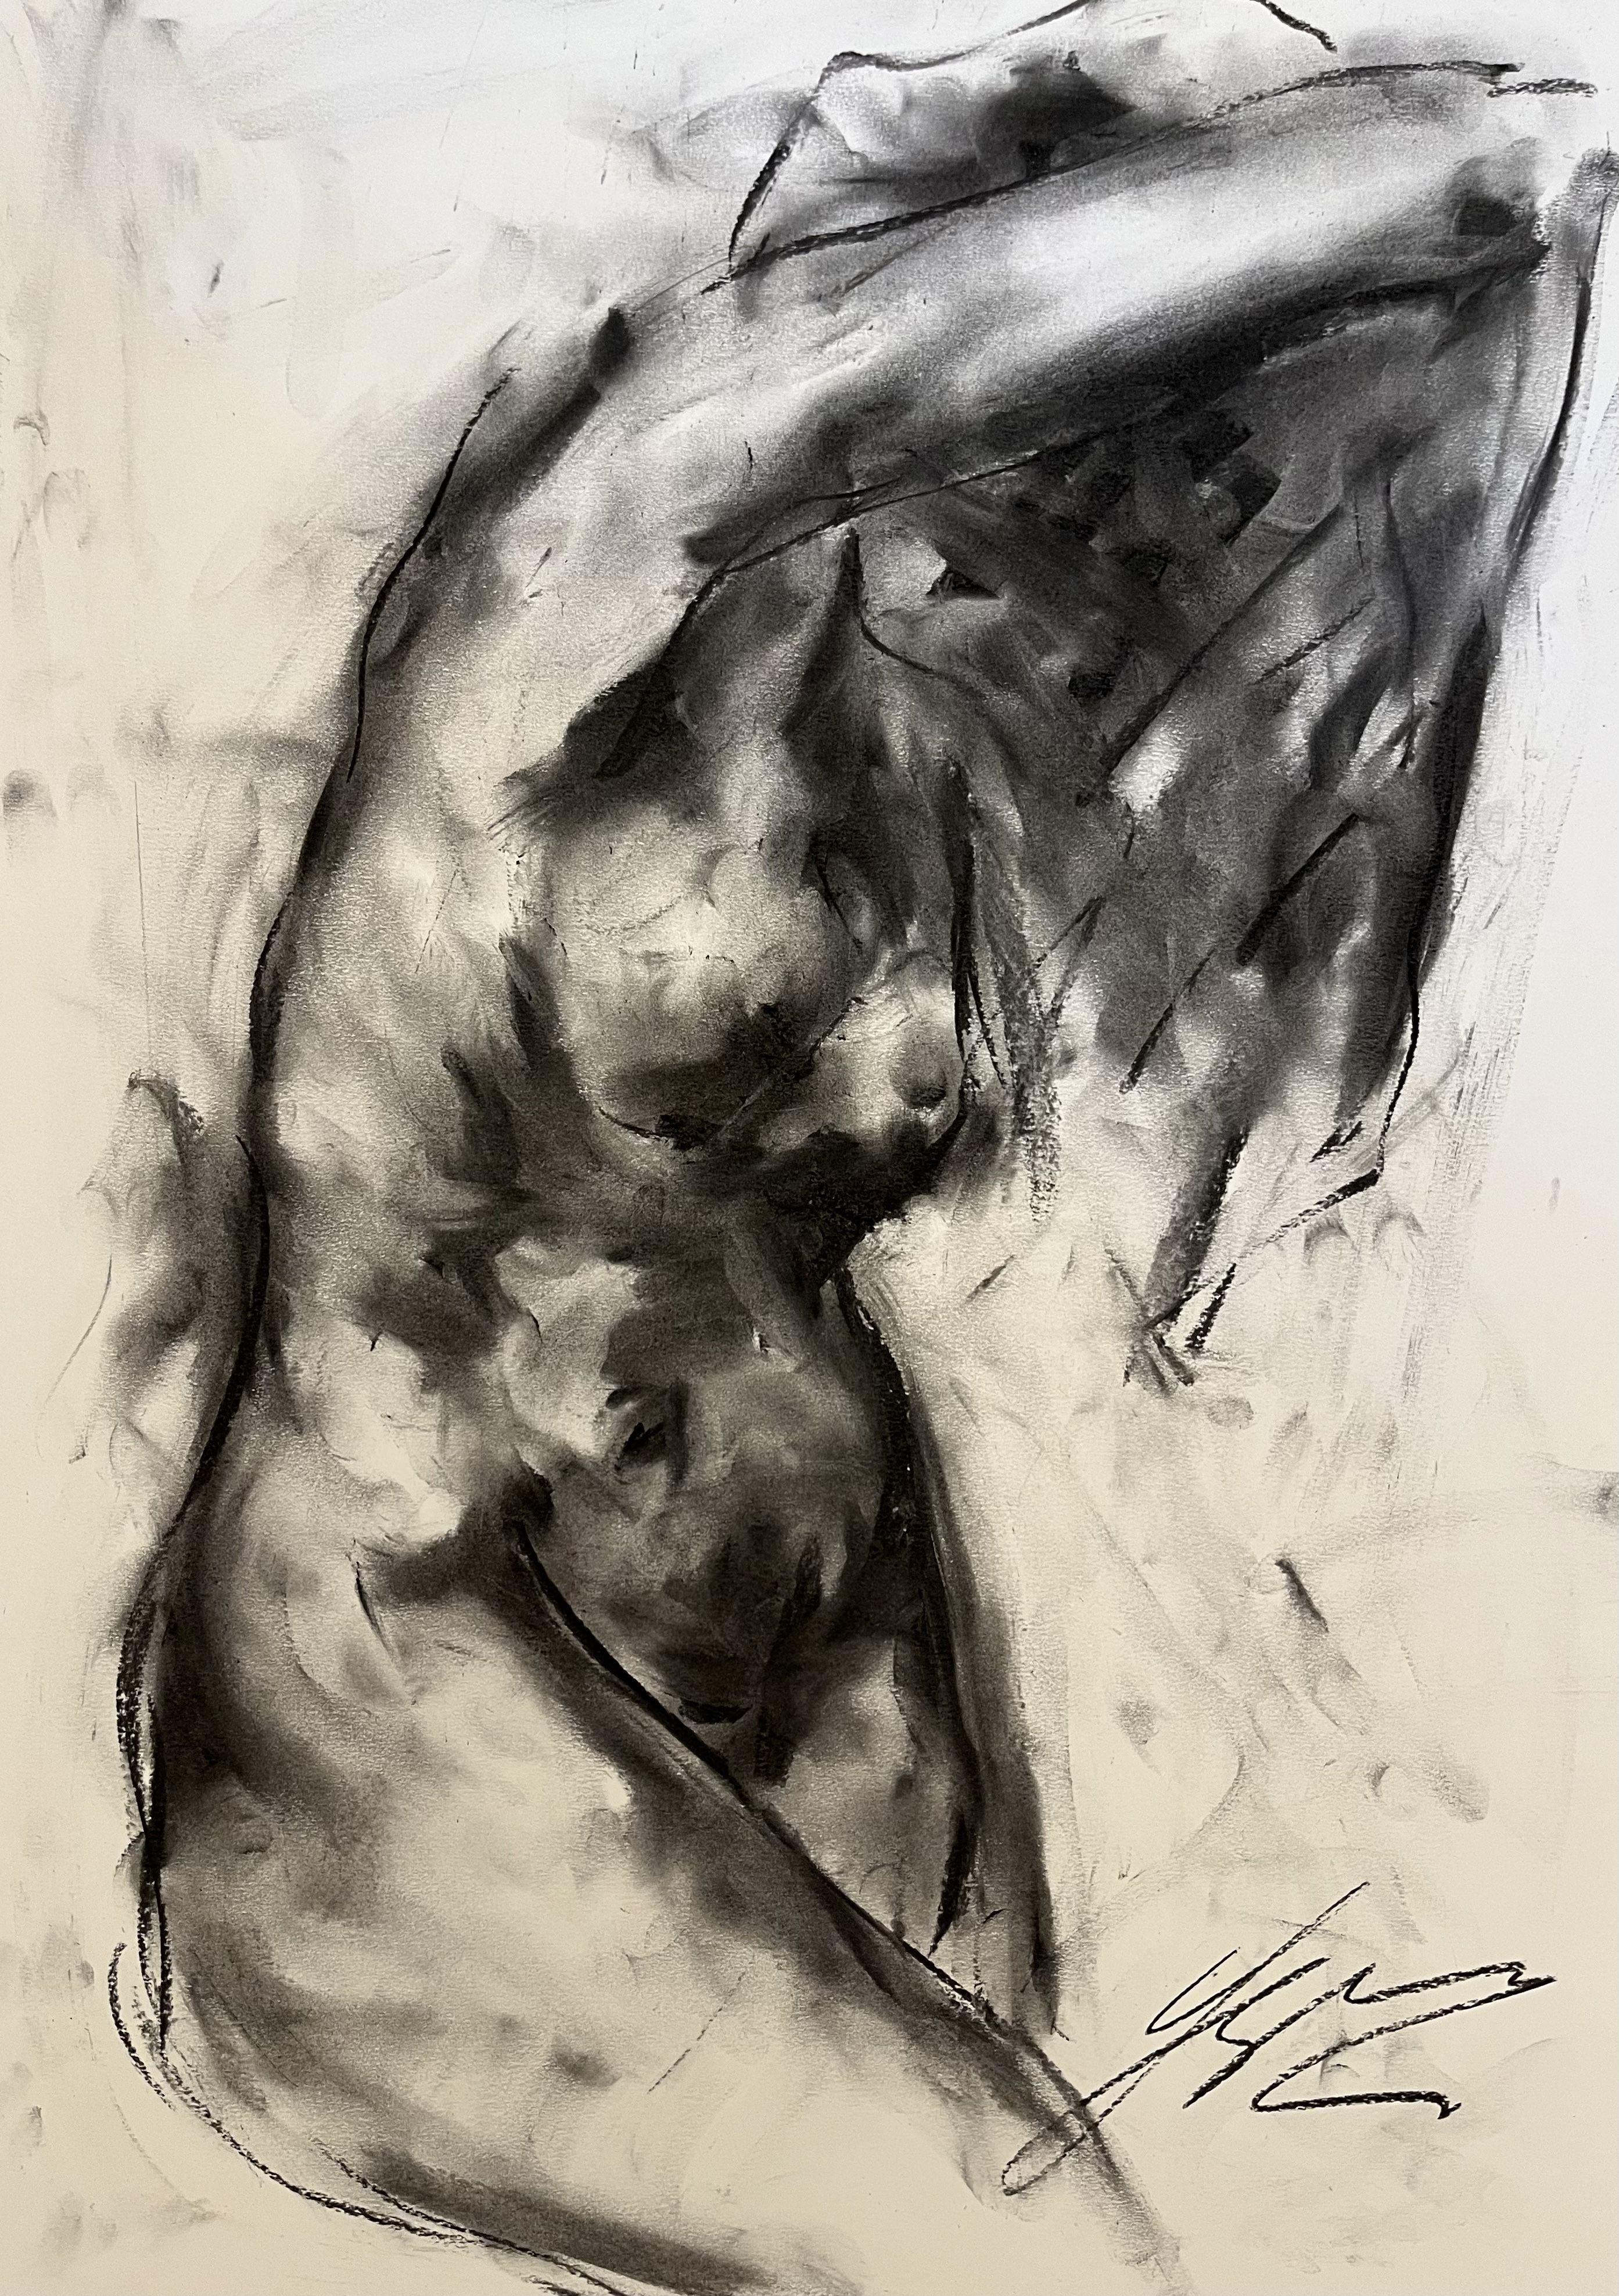 Wilderness, Drawing, Charcoal on Paper - Art by James Shipton